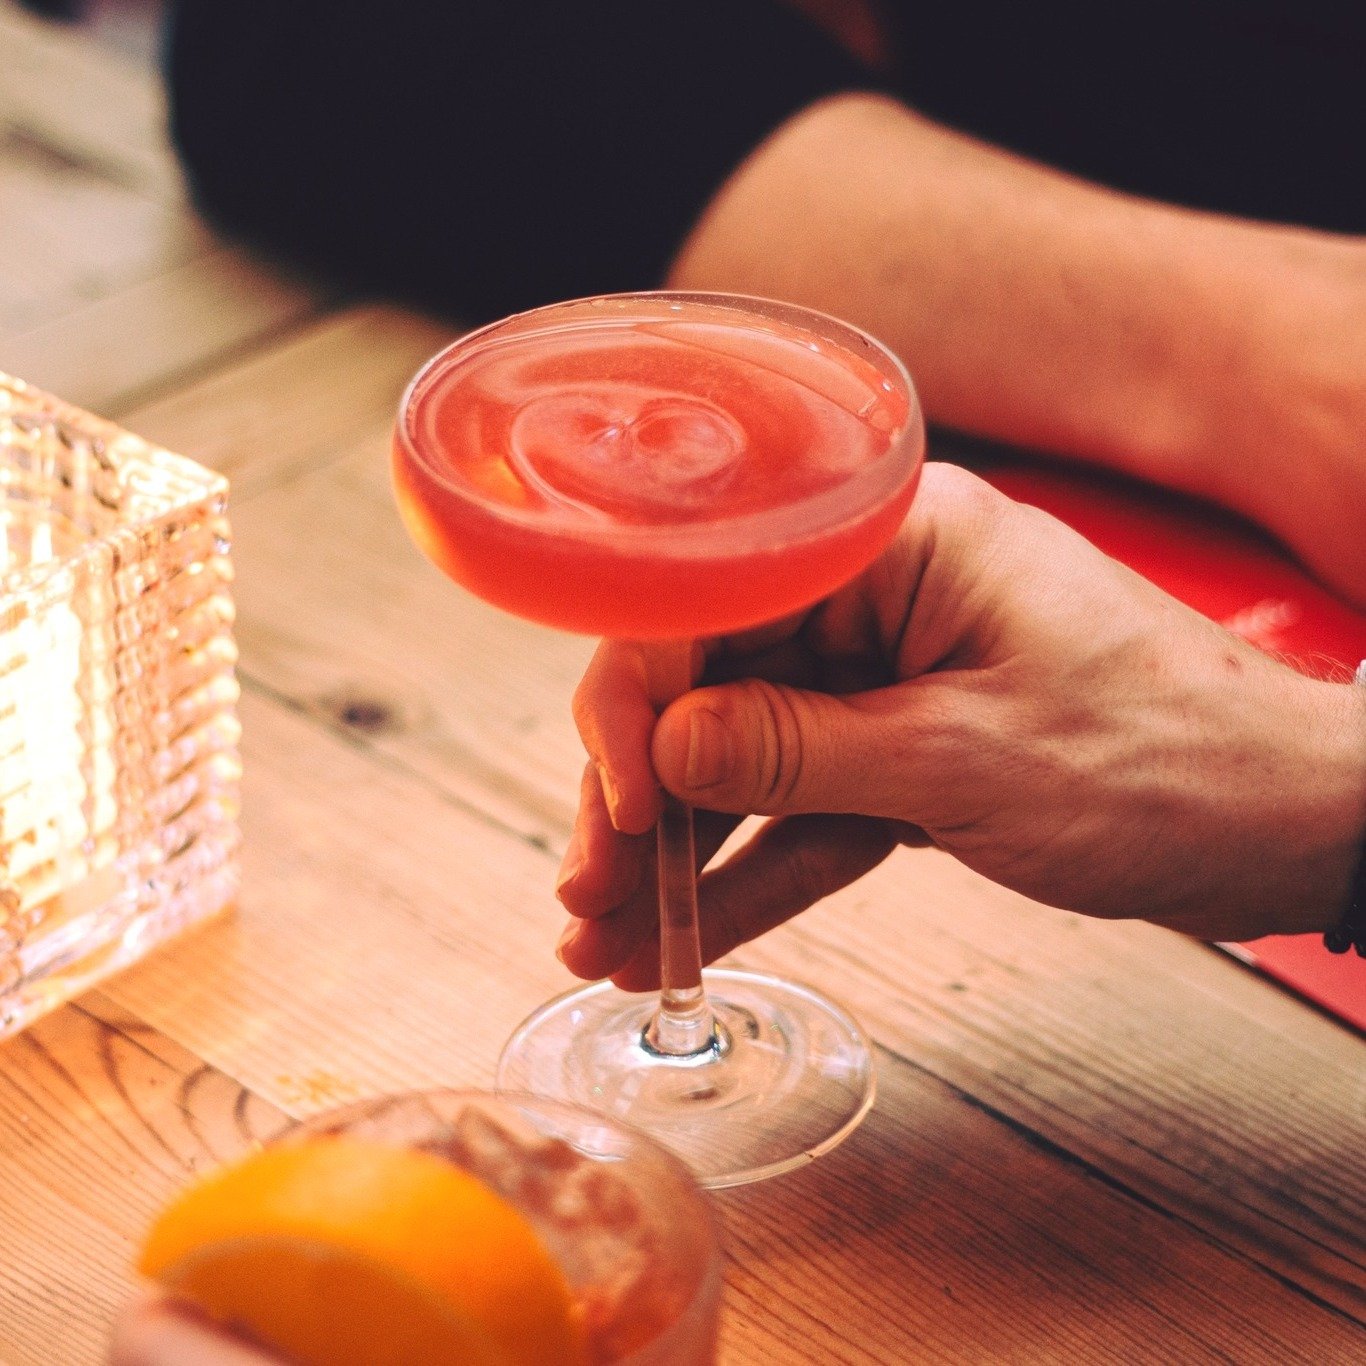 Happy National Cosmopolitan Day!

Vodka, triple sec, cranberry juice, lime. Such classic punchy flavours and we love it! 
Carrie from Sex and the City may have claimed it as hers, but we can all enjoy it!

#Cosmopolitan #CosmoLove #LondonCosmo #CityS